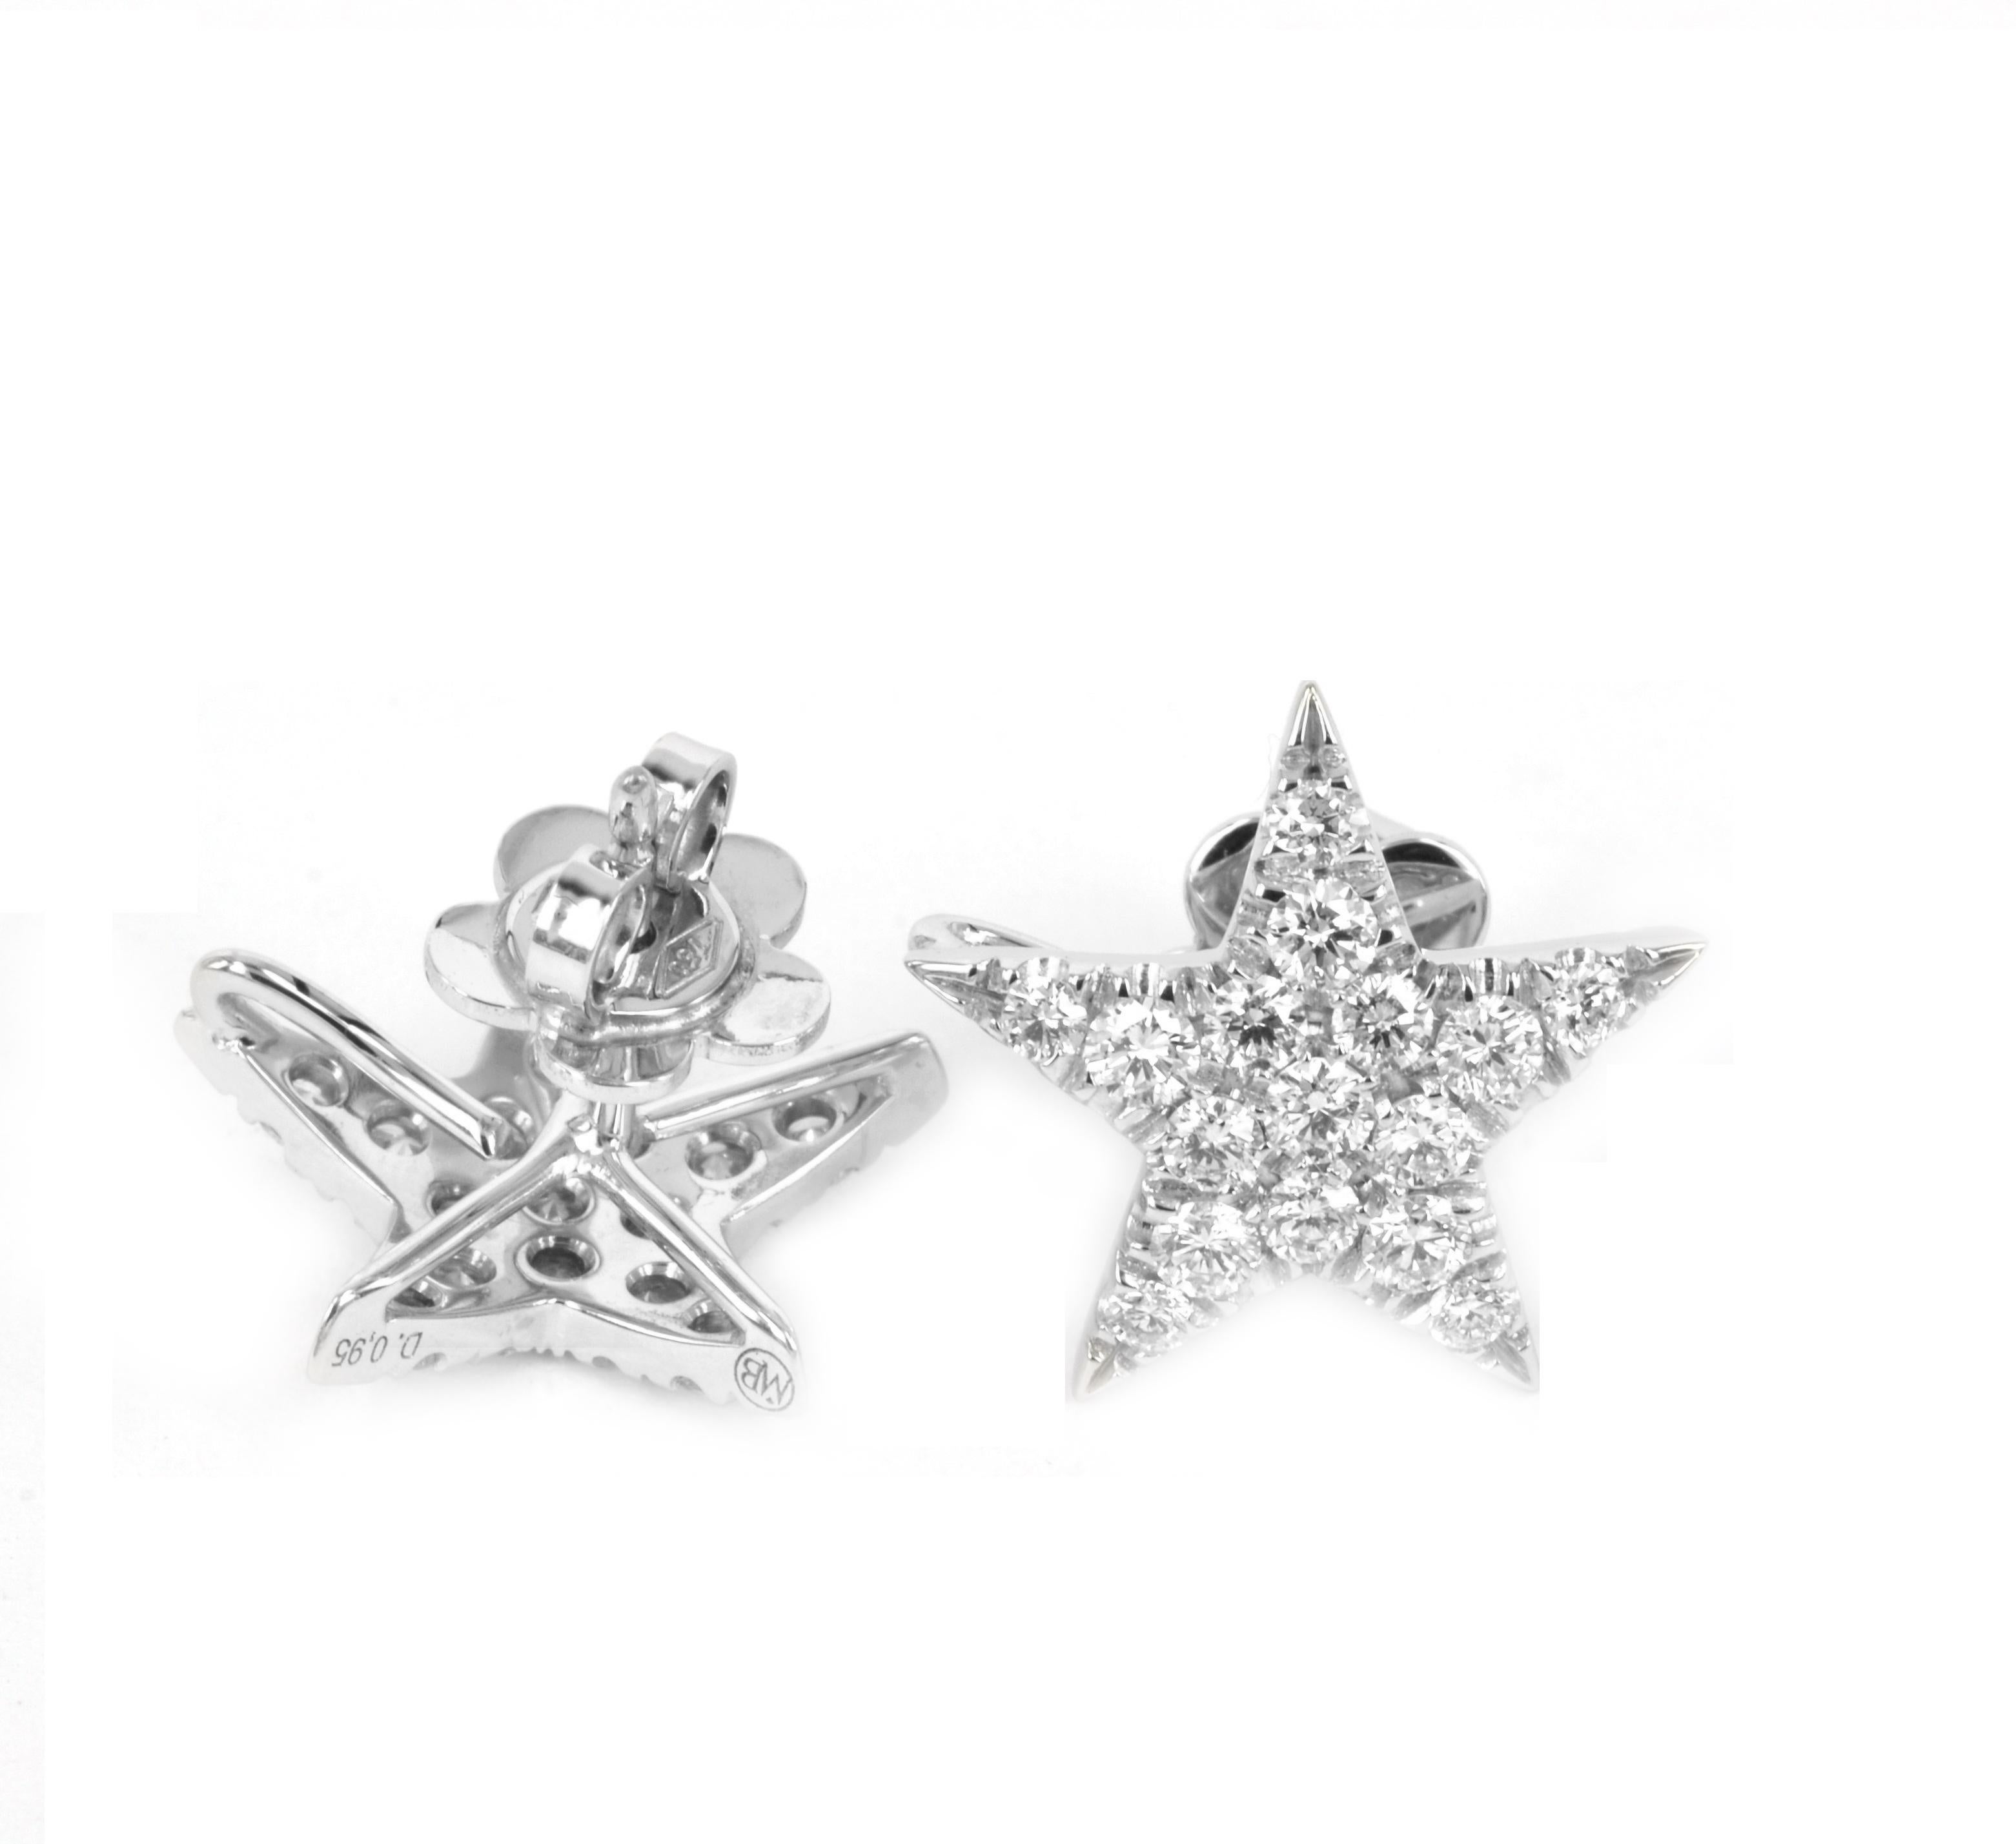 Beautifully pavè set in diamonds, the Stars lobe earrings are handcrafted in Italy, in Margherita Burgener workshop. Very sparkling and very chic.
Size inches 0,629  at largest point equal to cm 1.6 -  Fitting and butterfly

18KT white gold   total